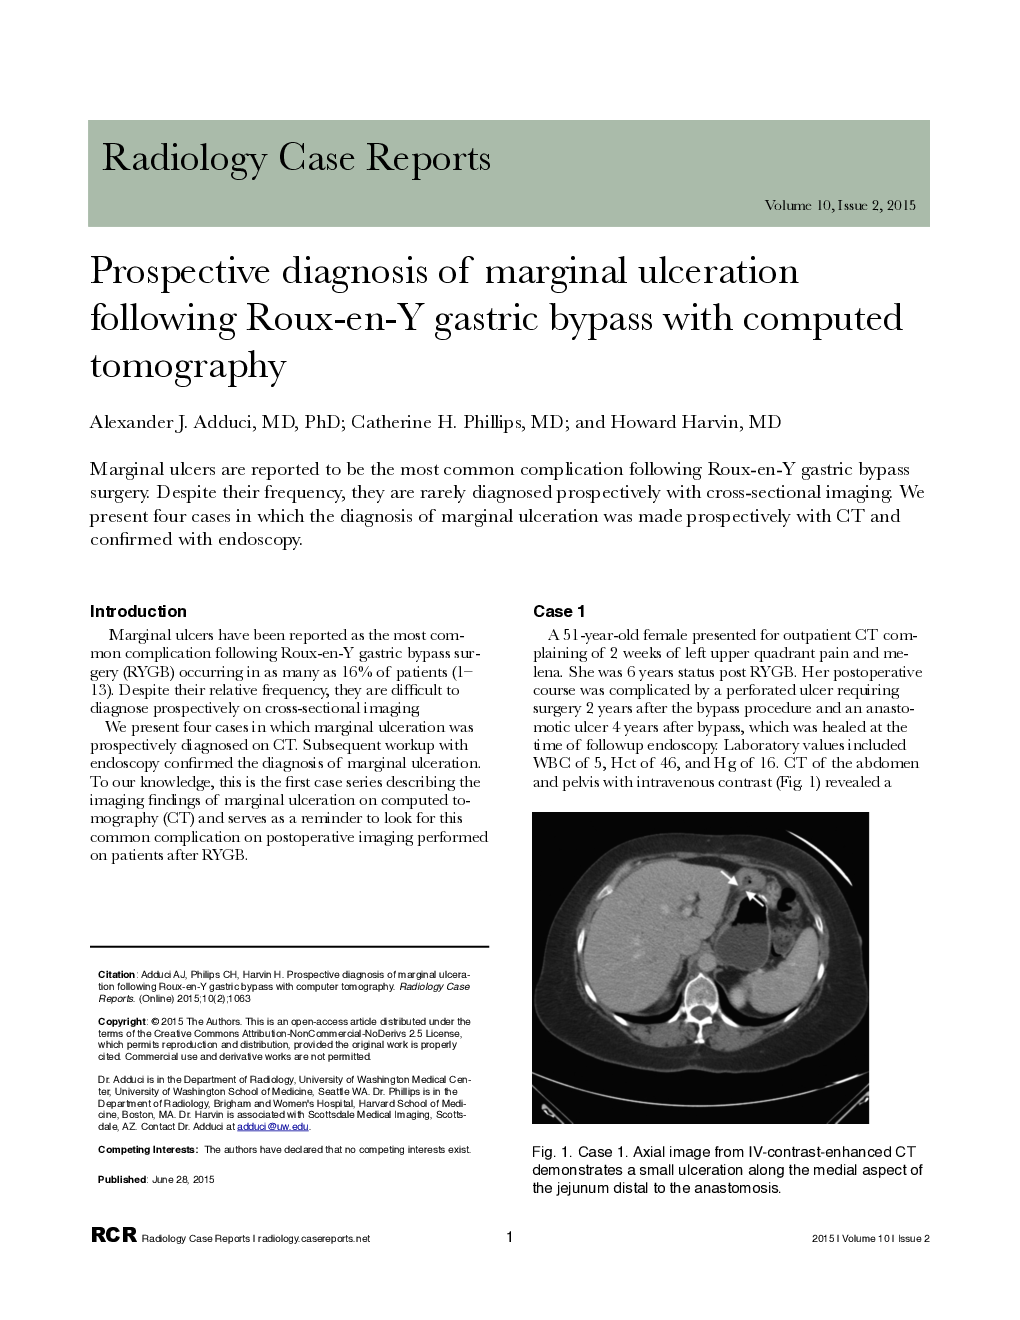 Prospective diagnosis of marginal ulceration following Roux-en-Y gastric bypass with computed tomography